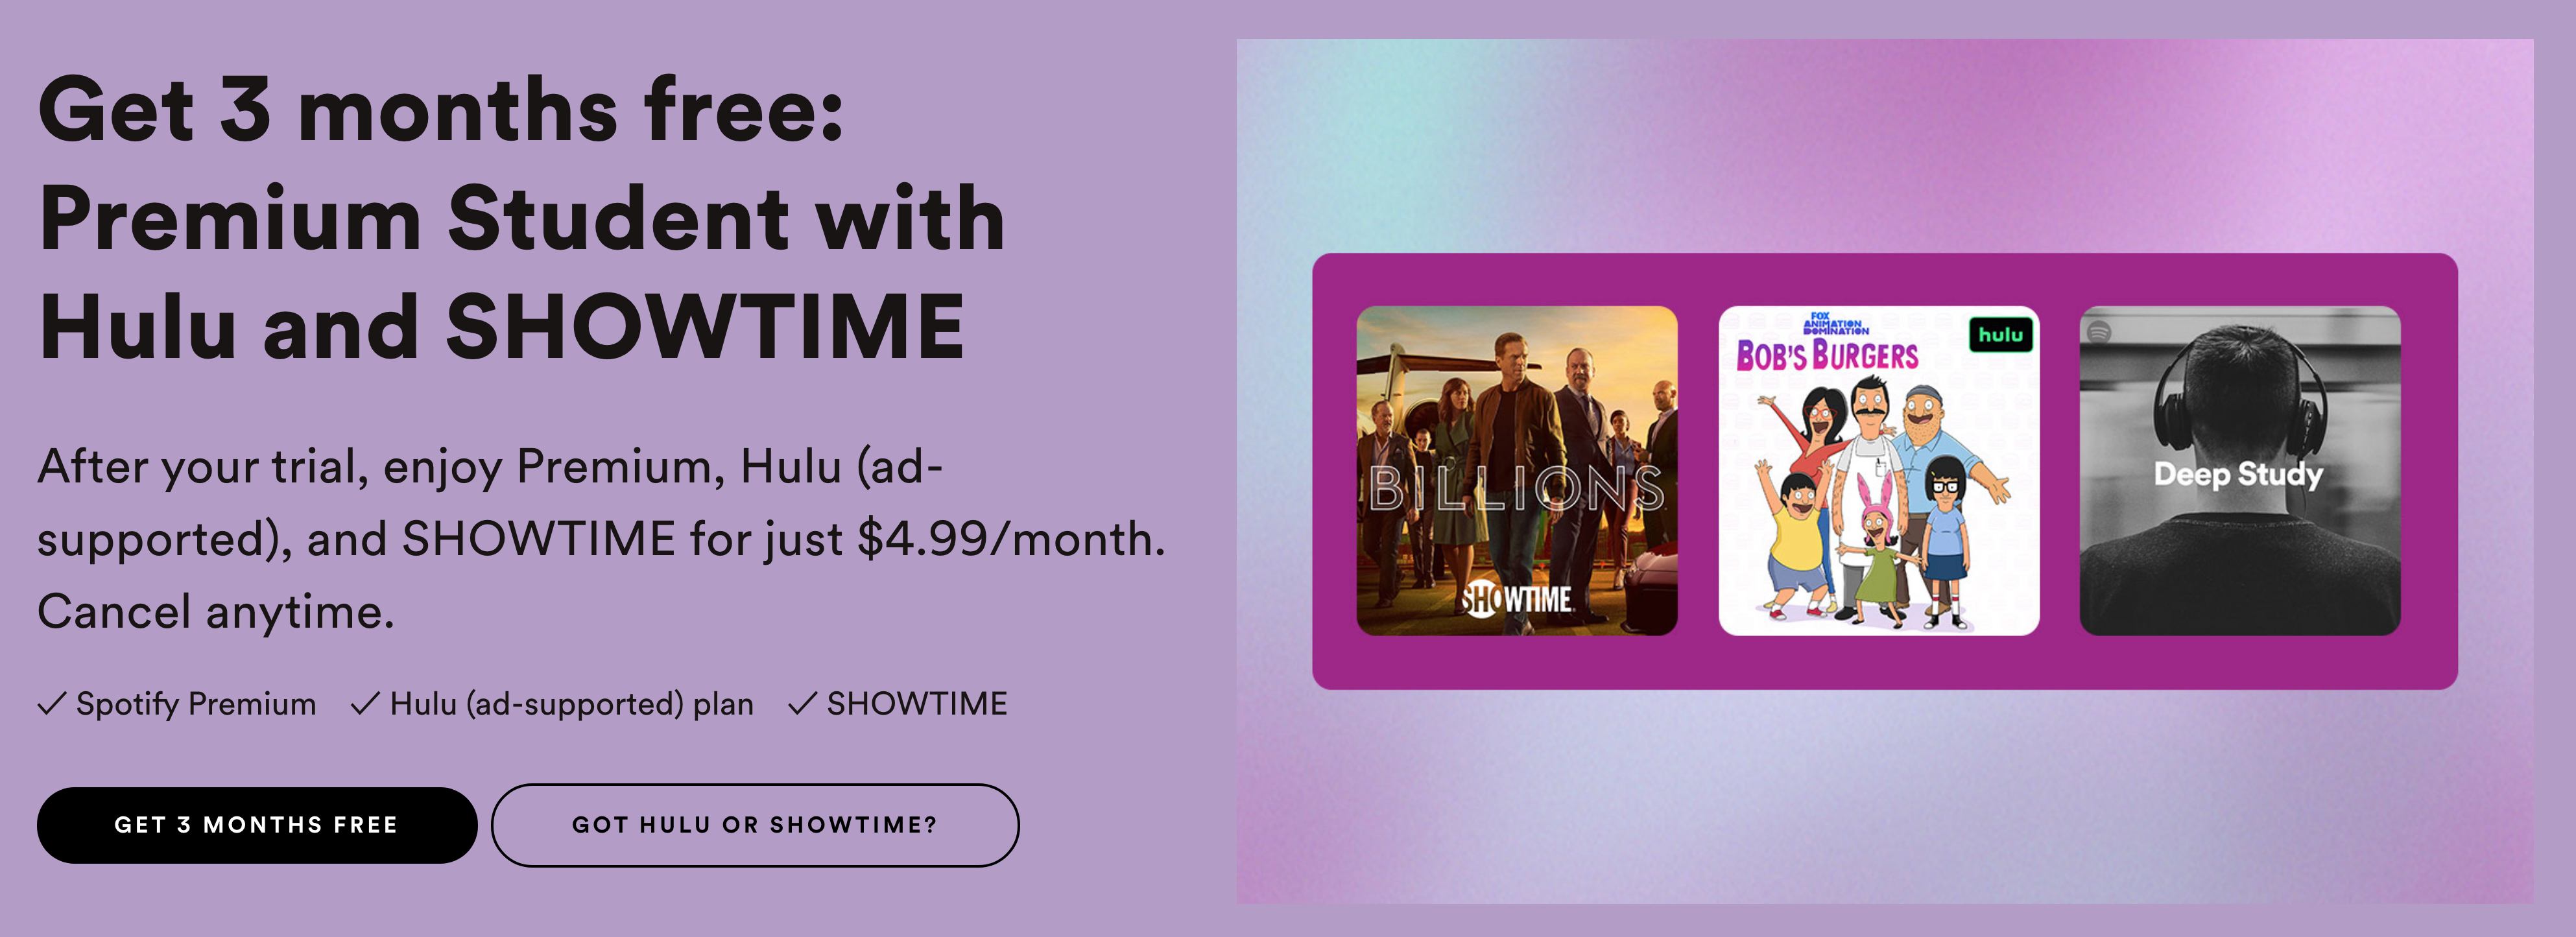 How to get Hulu and SHOWTIME for free with Spotify Premium